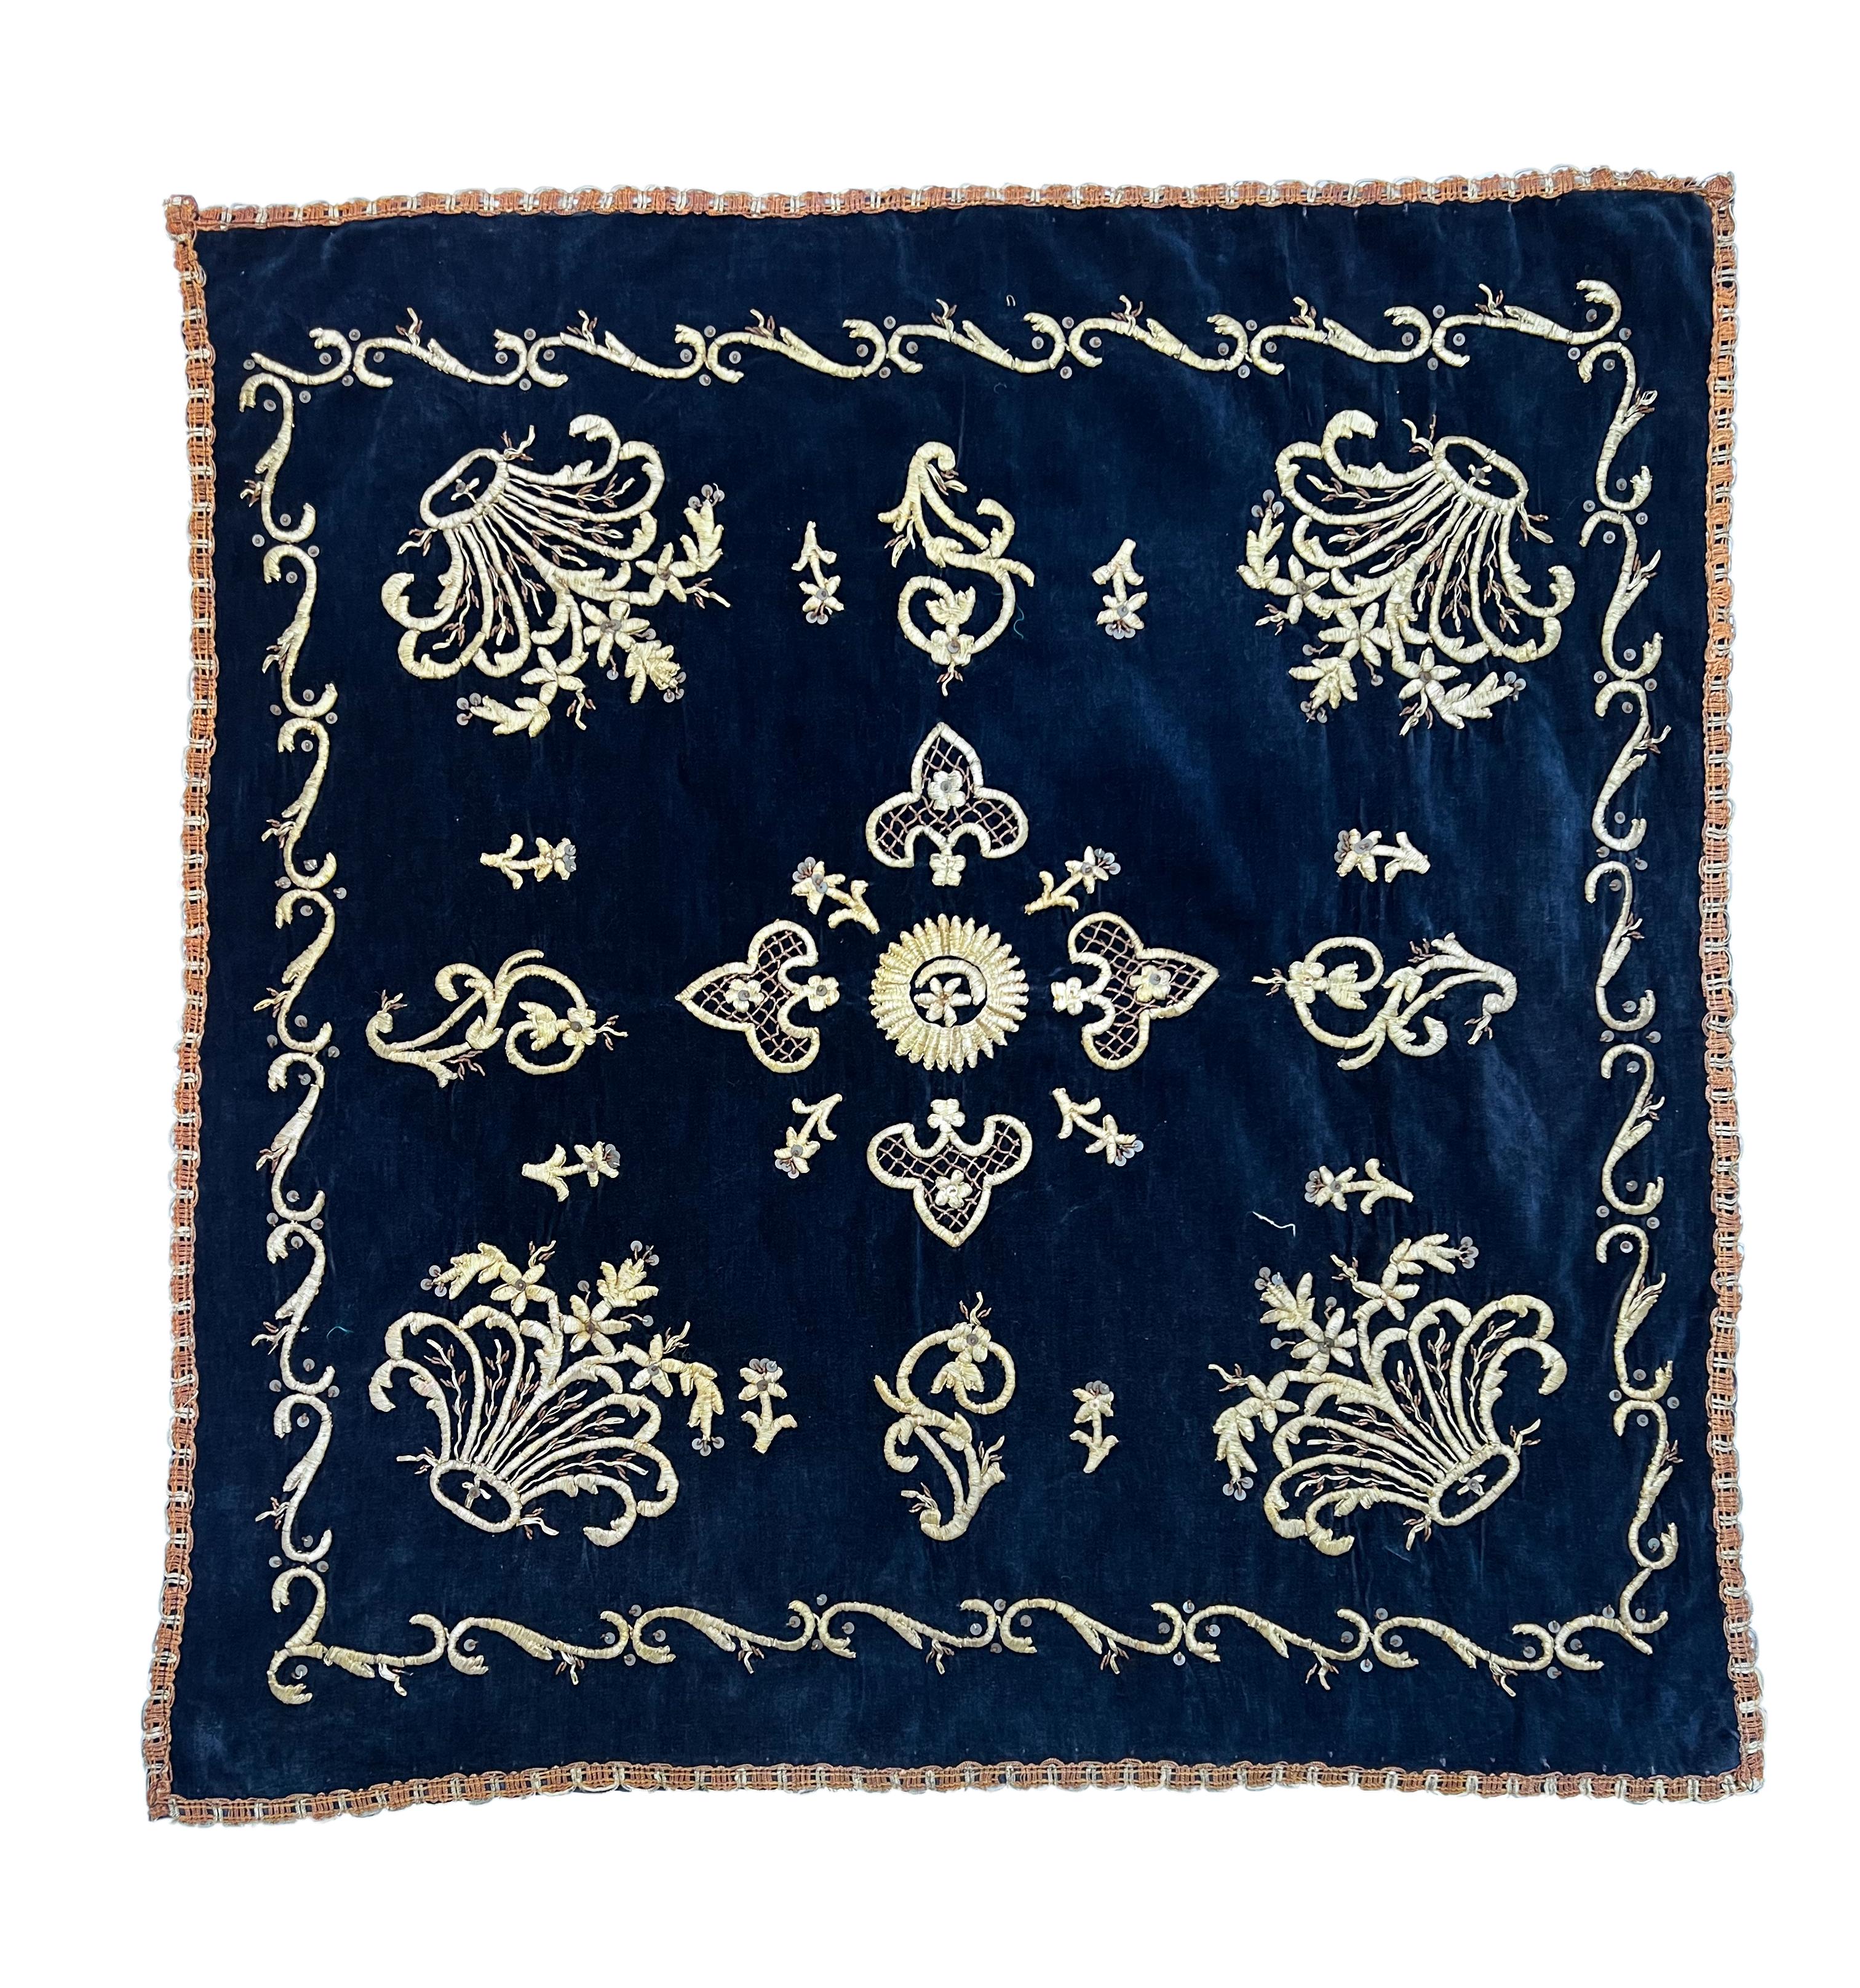 Metallic Thread Collection of Ottoman Velvet and Metal-Thread Coverlet or Hanging, Turkey For Sale